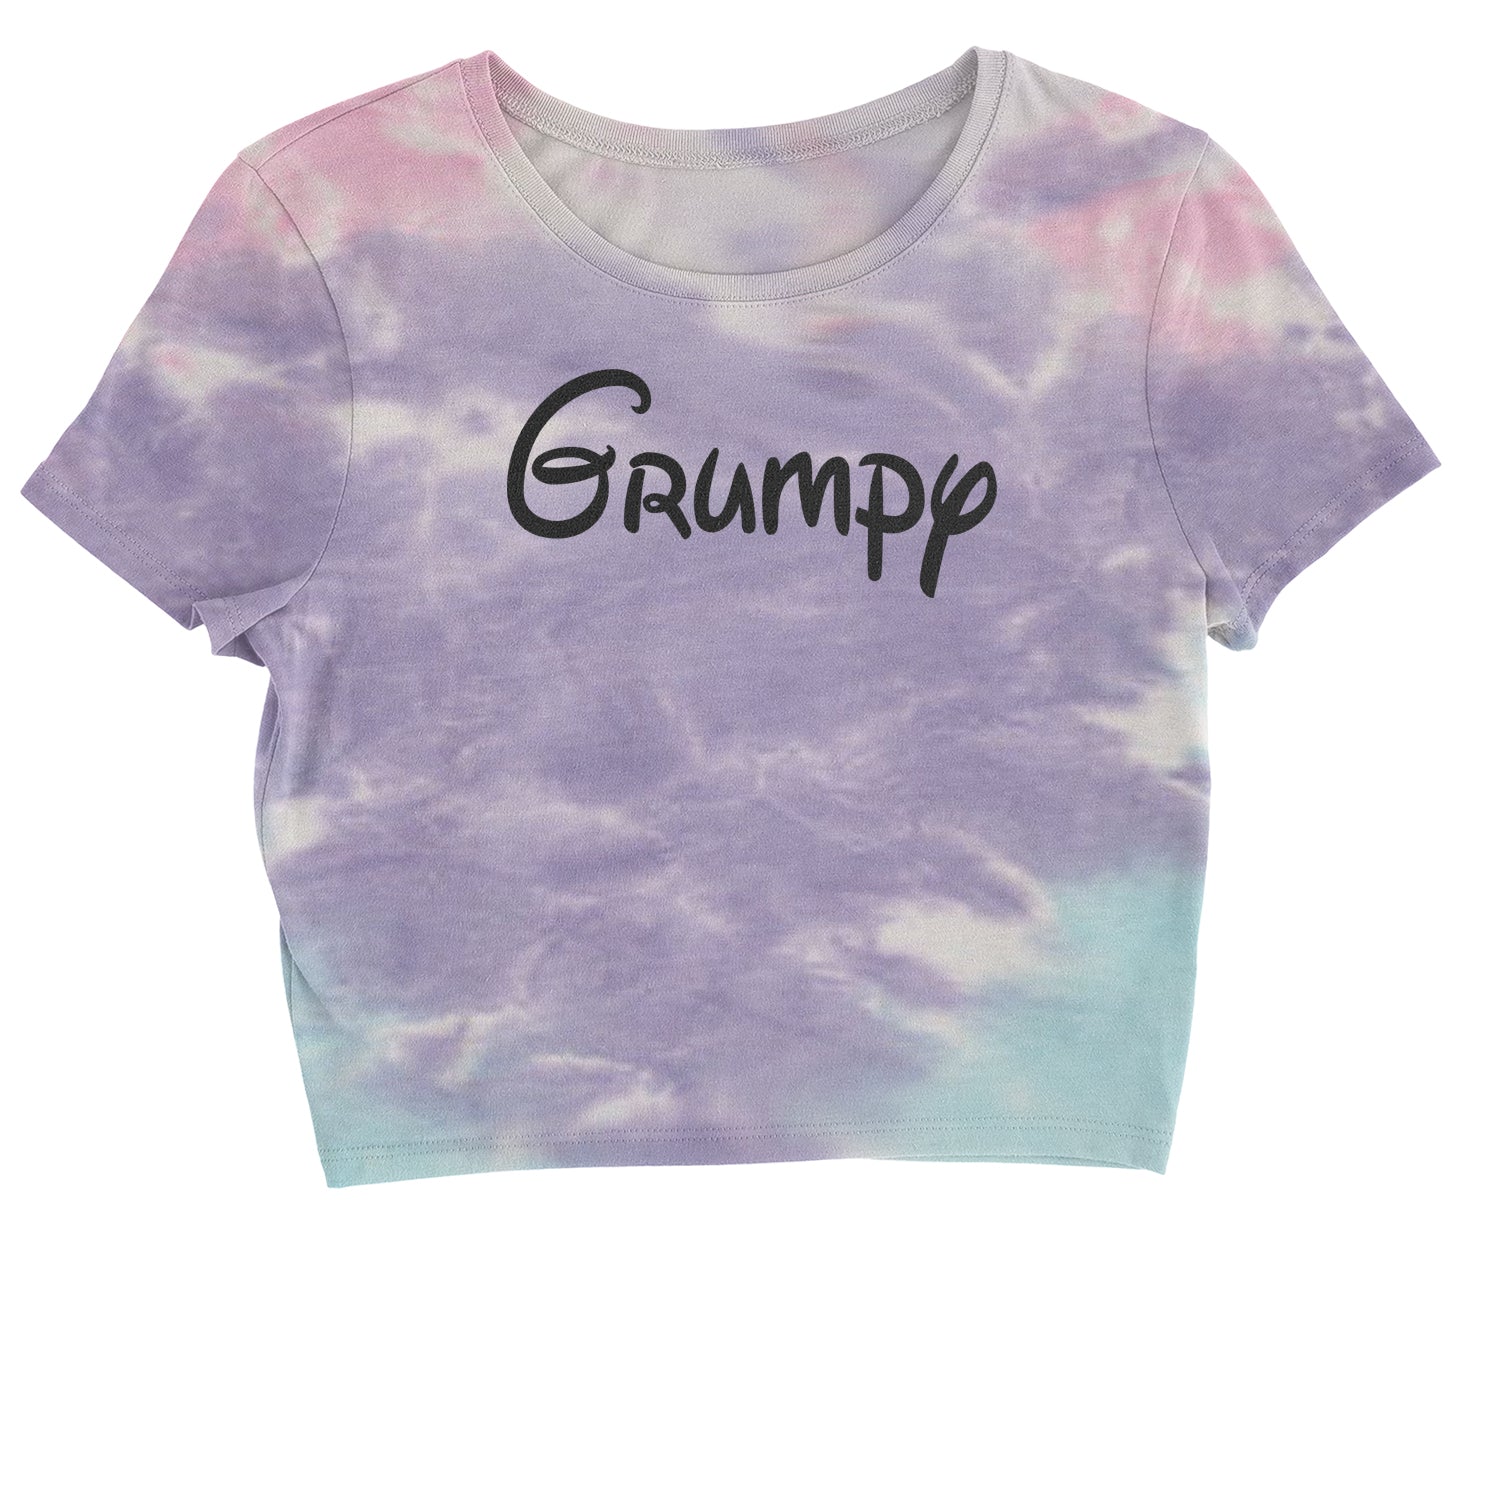 Grumpy - 7 Dwarfs Costume Cropped T-Shirt and, costume, dwarfs, group, halloween, matching, seven, snow, the, white by Expression Tees